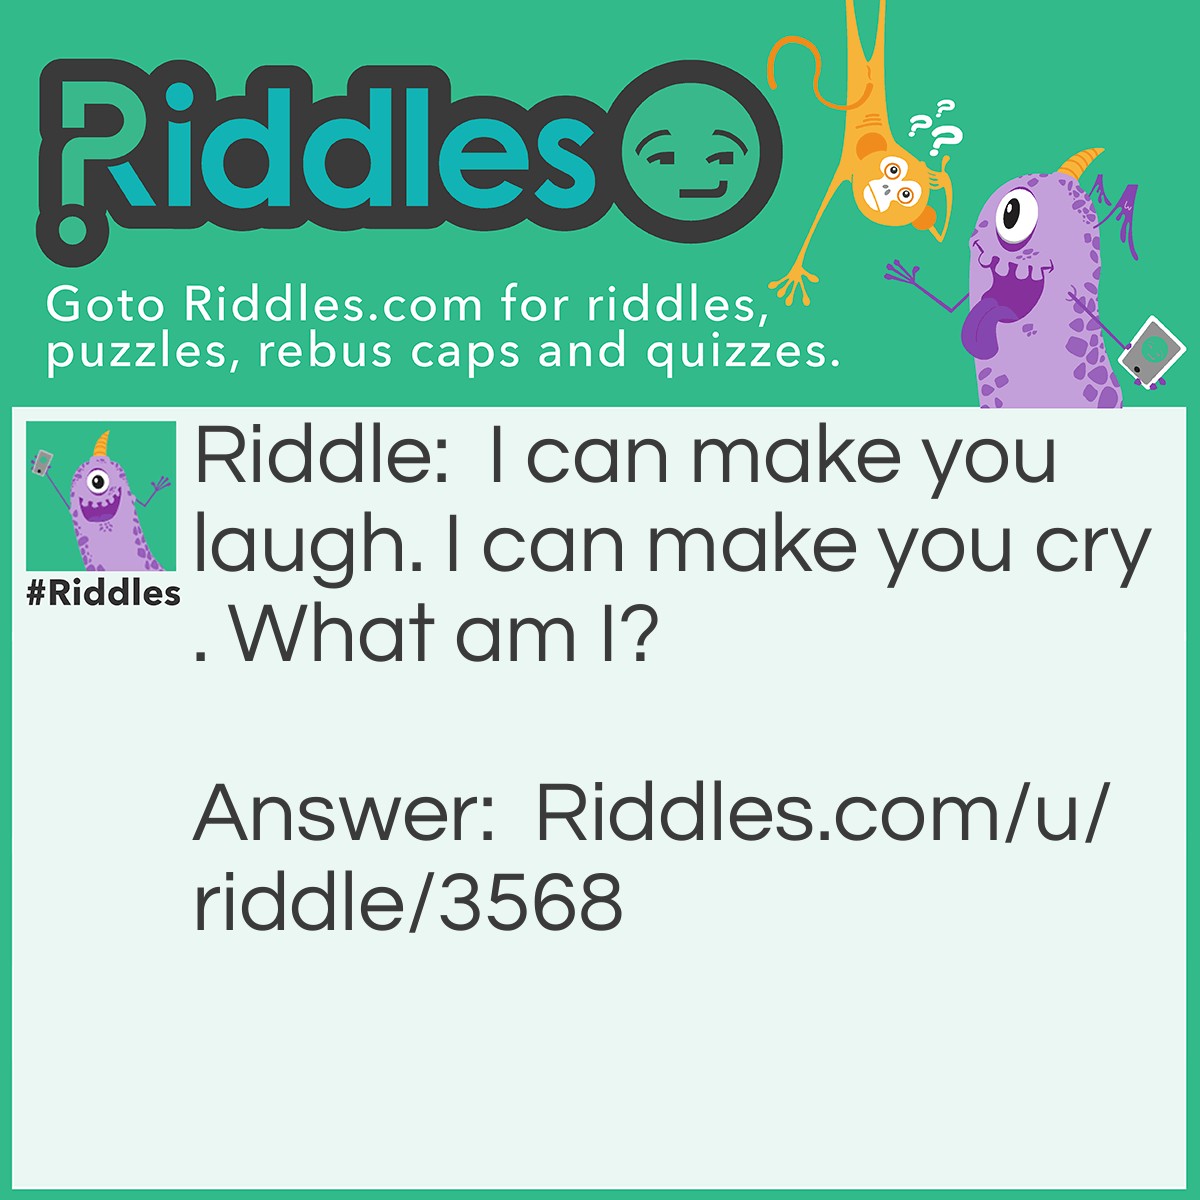 Riddle: I can make you laugh. I can make you cry. What am I? Answer: A clown.